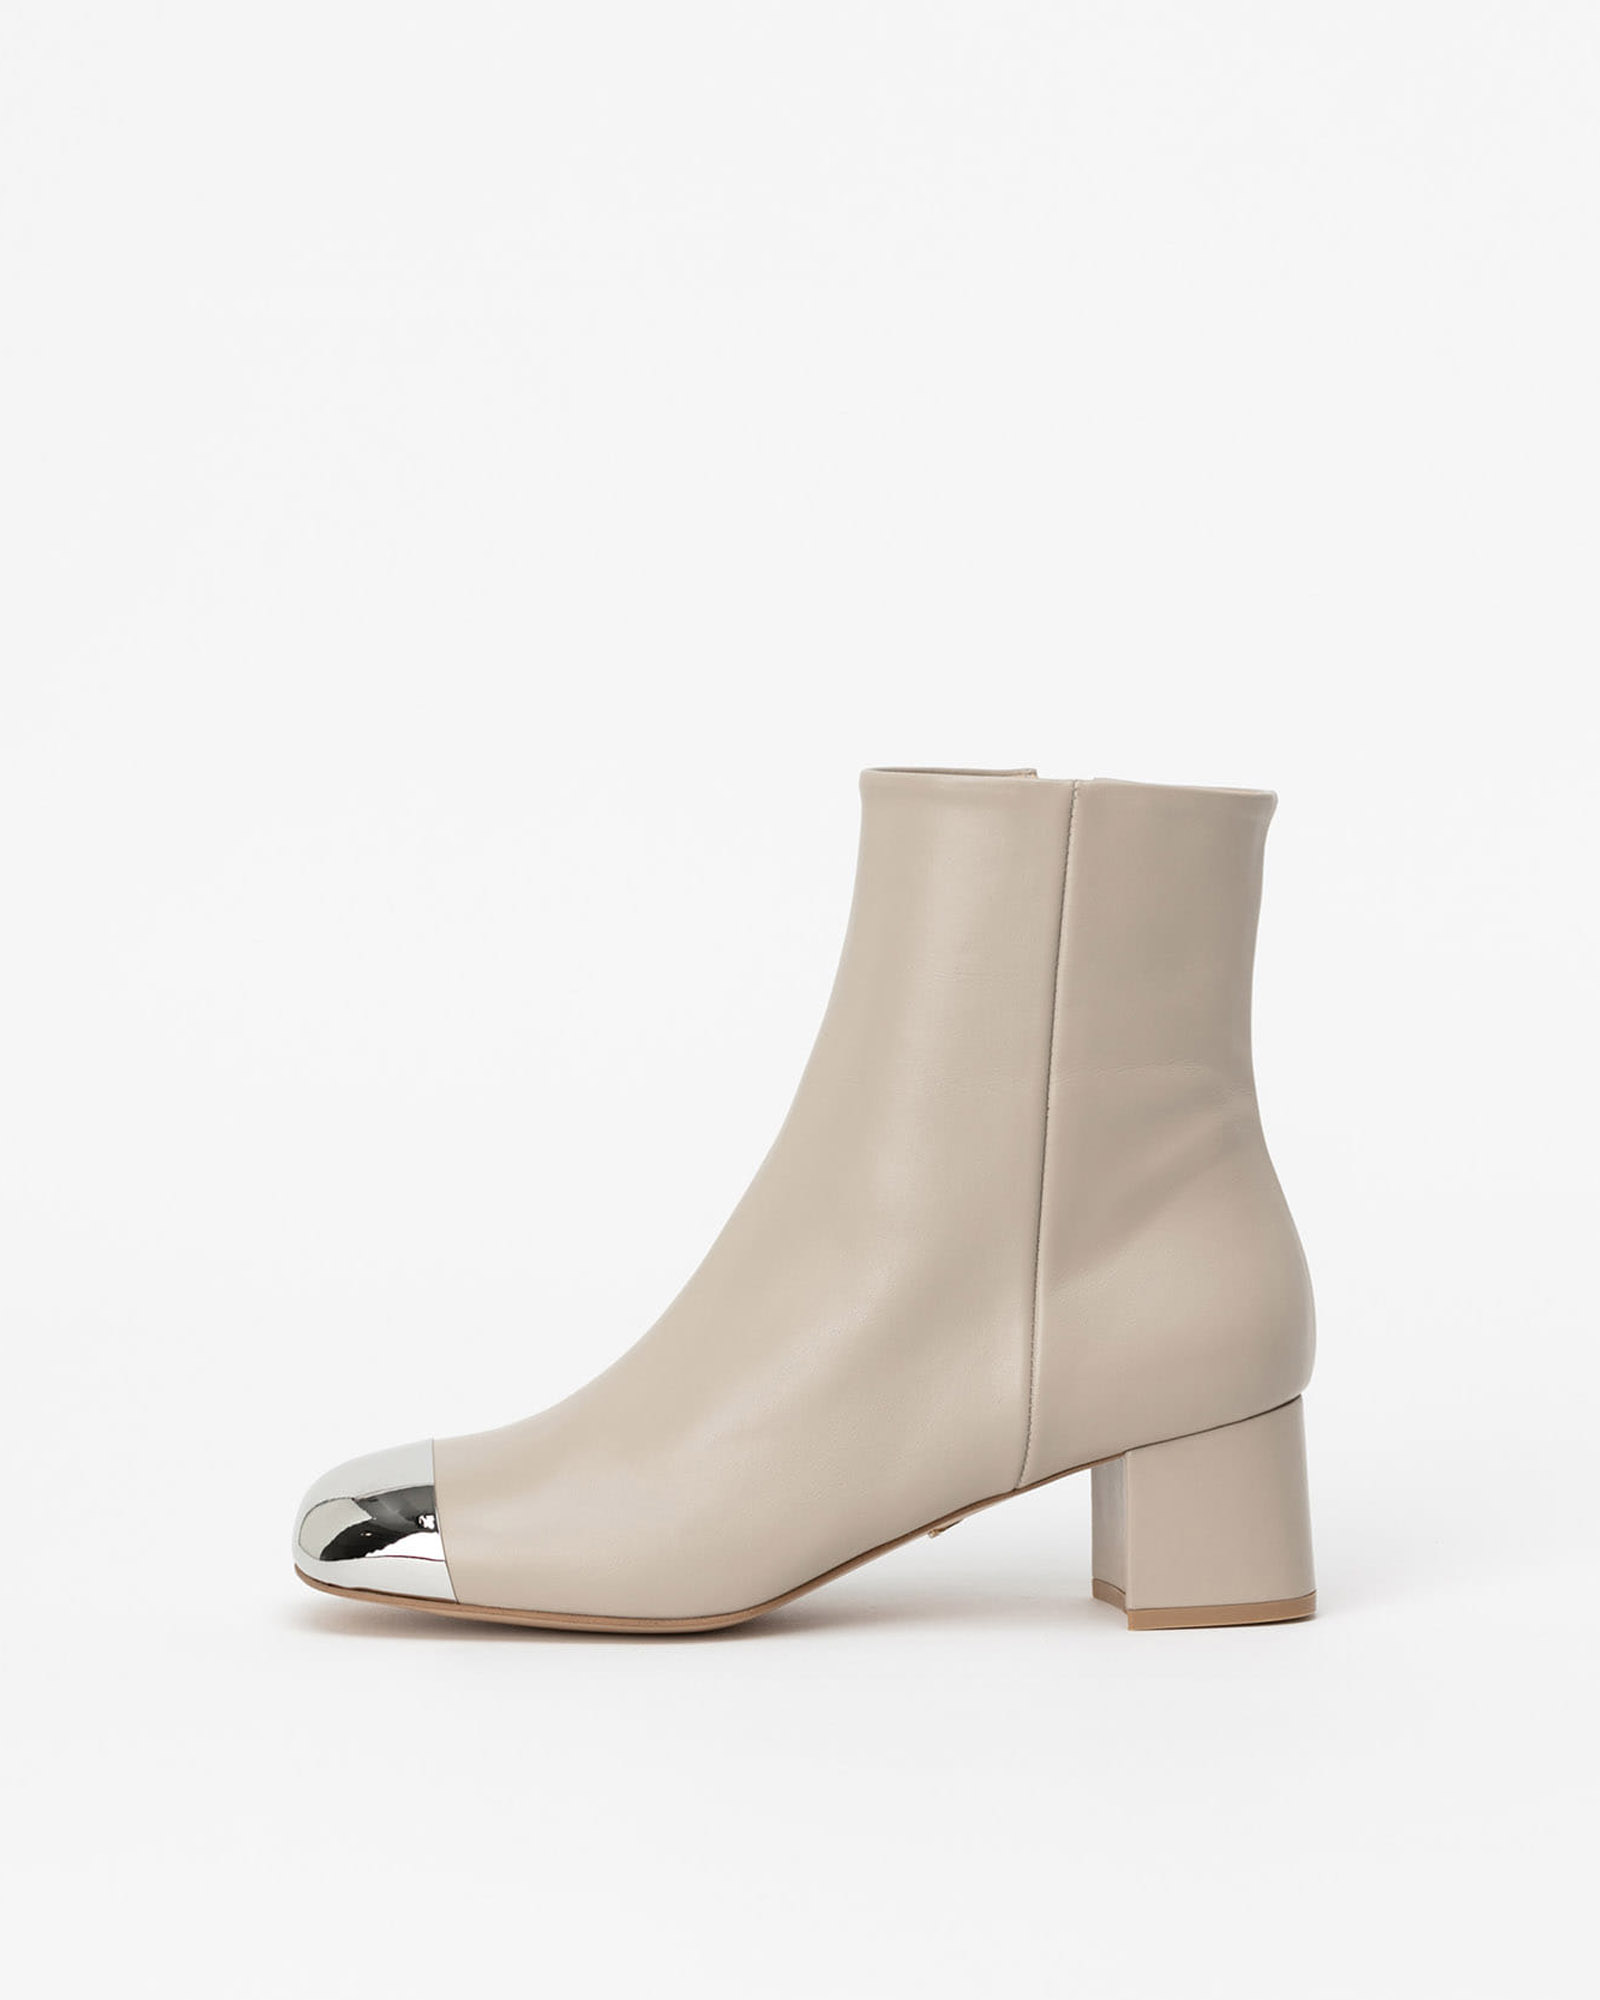 Vierne Metal Toe Cap Boots in Taupe Ivory